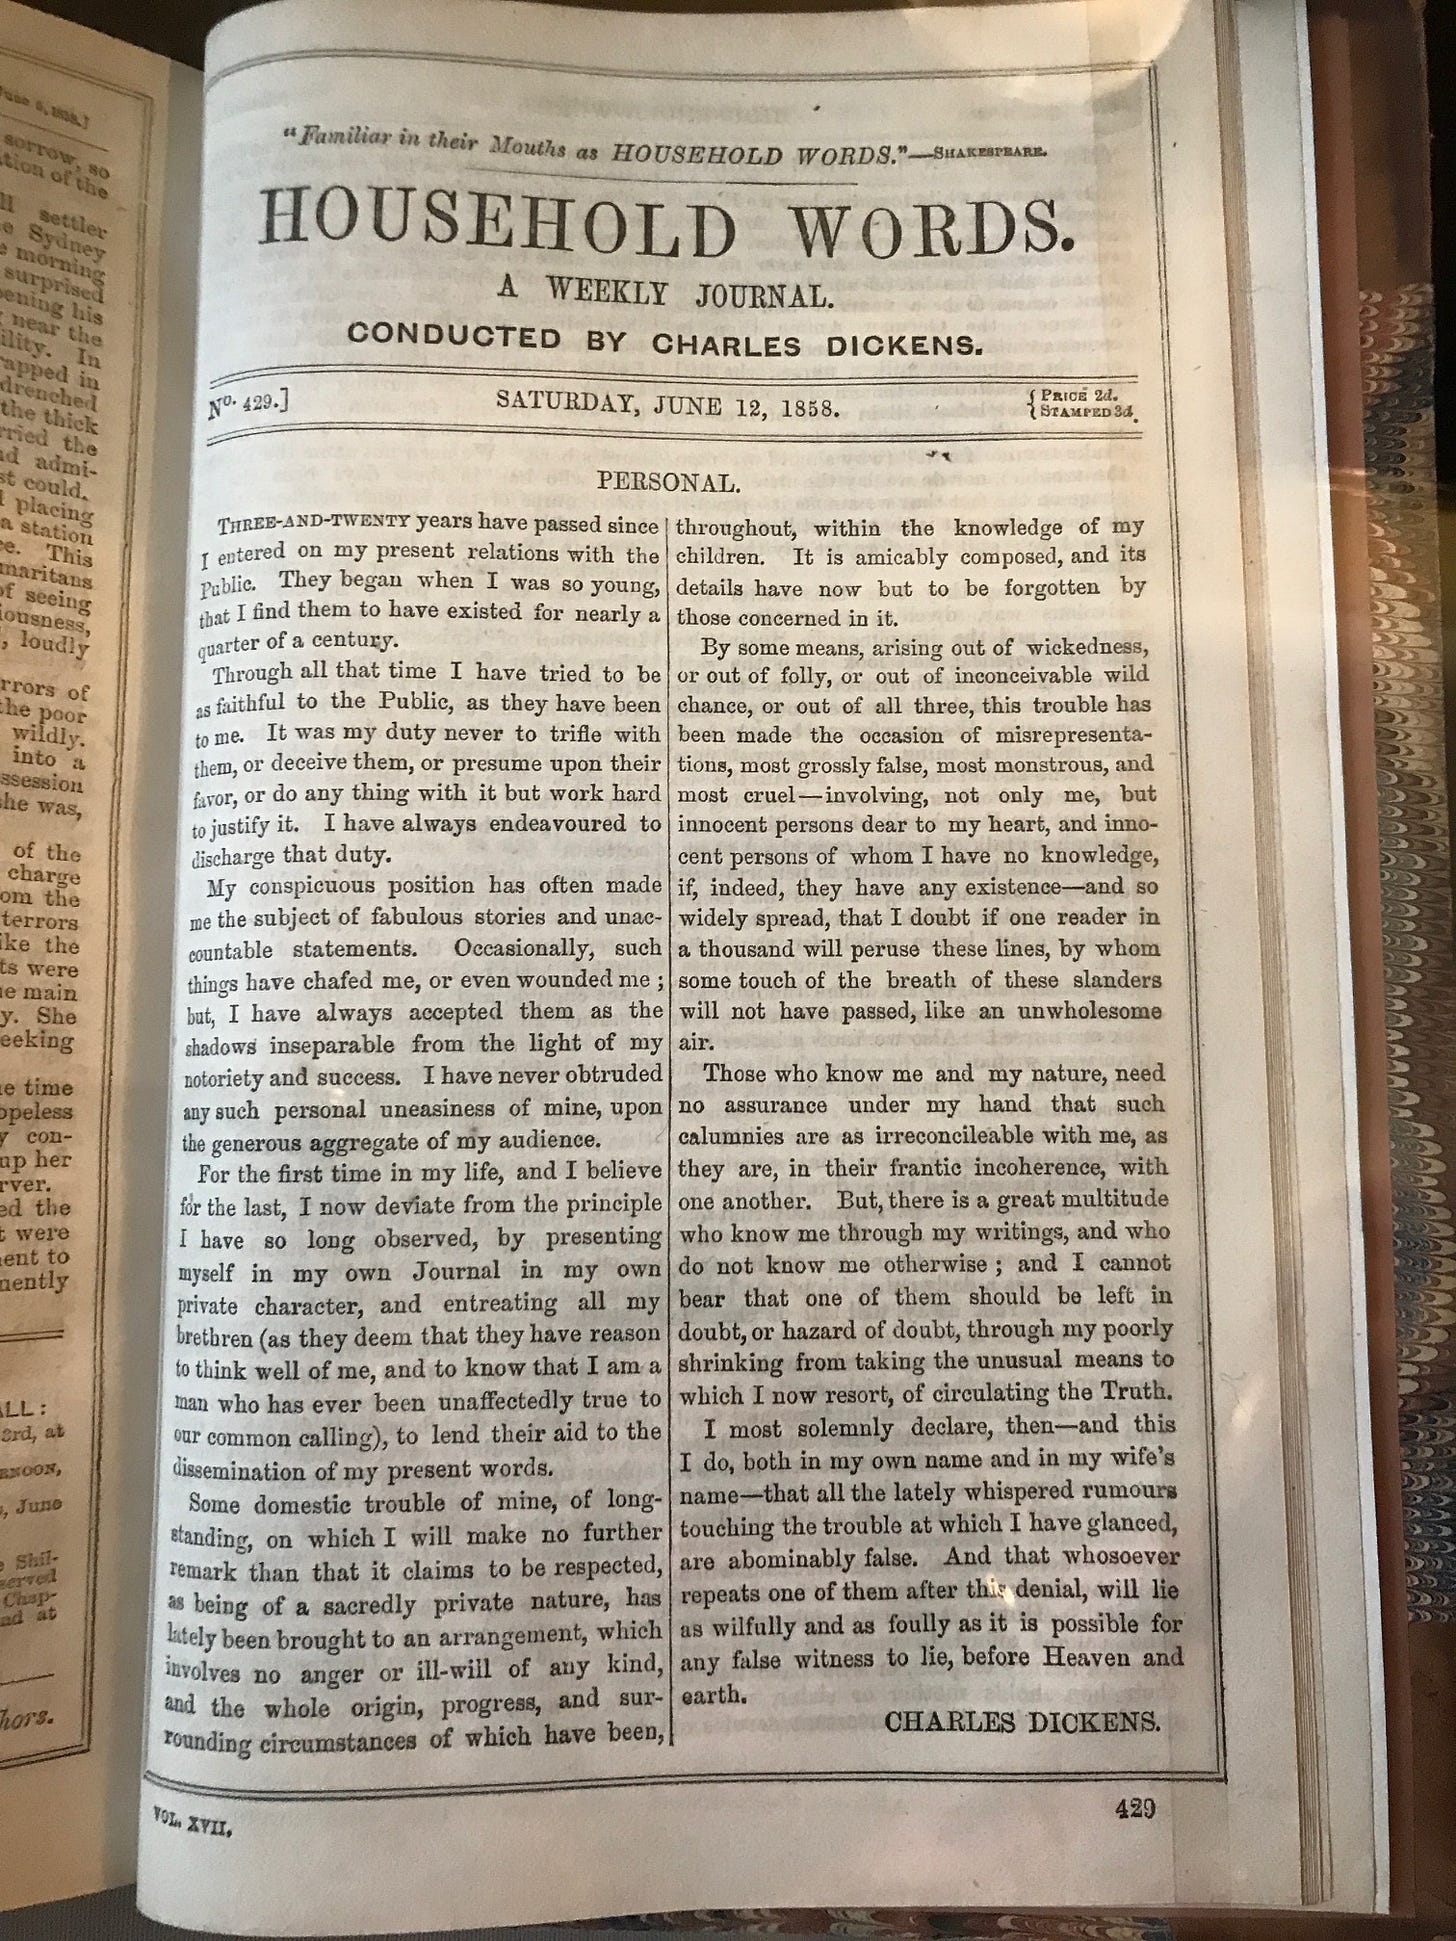 Photo of a full-page article from Dickens's publication, "Household Words," containing his "Personal News" about leaving his wife.